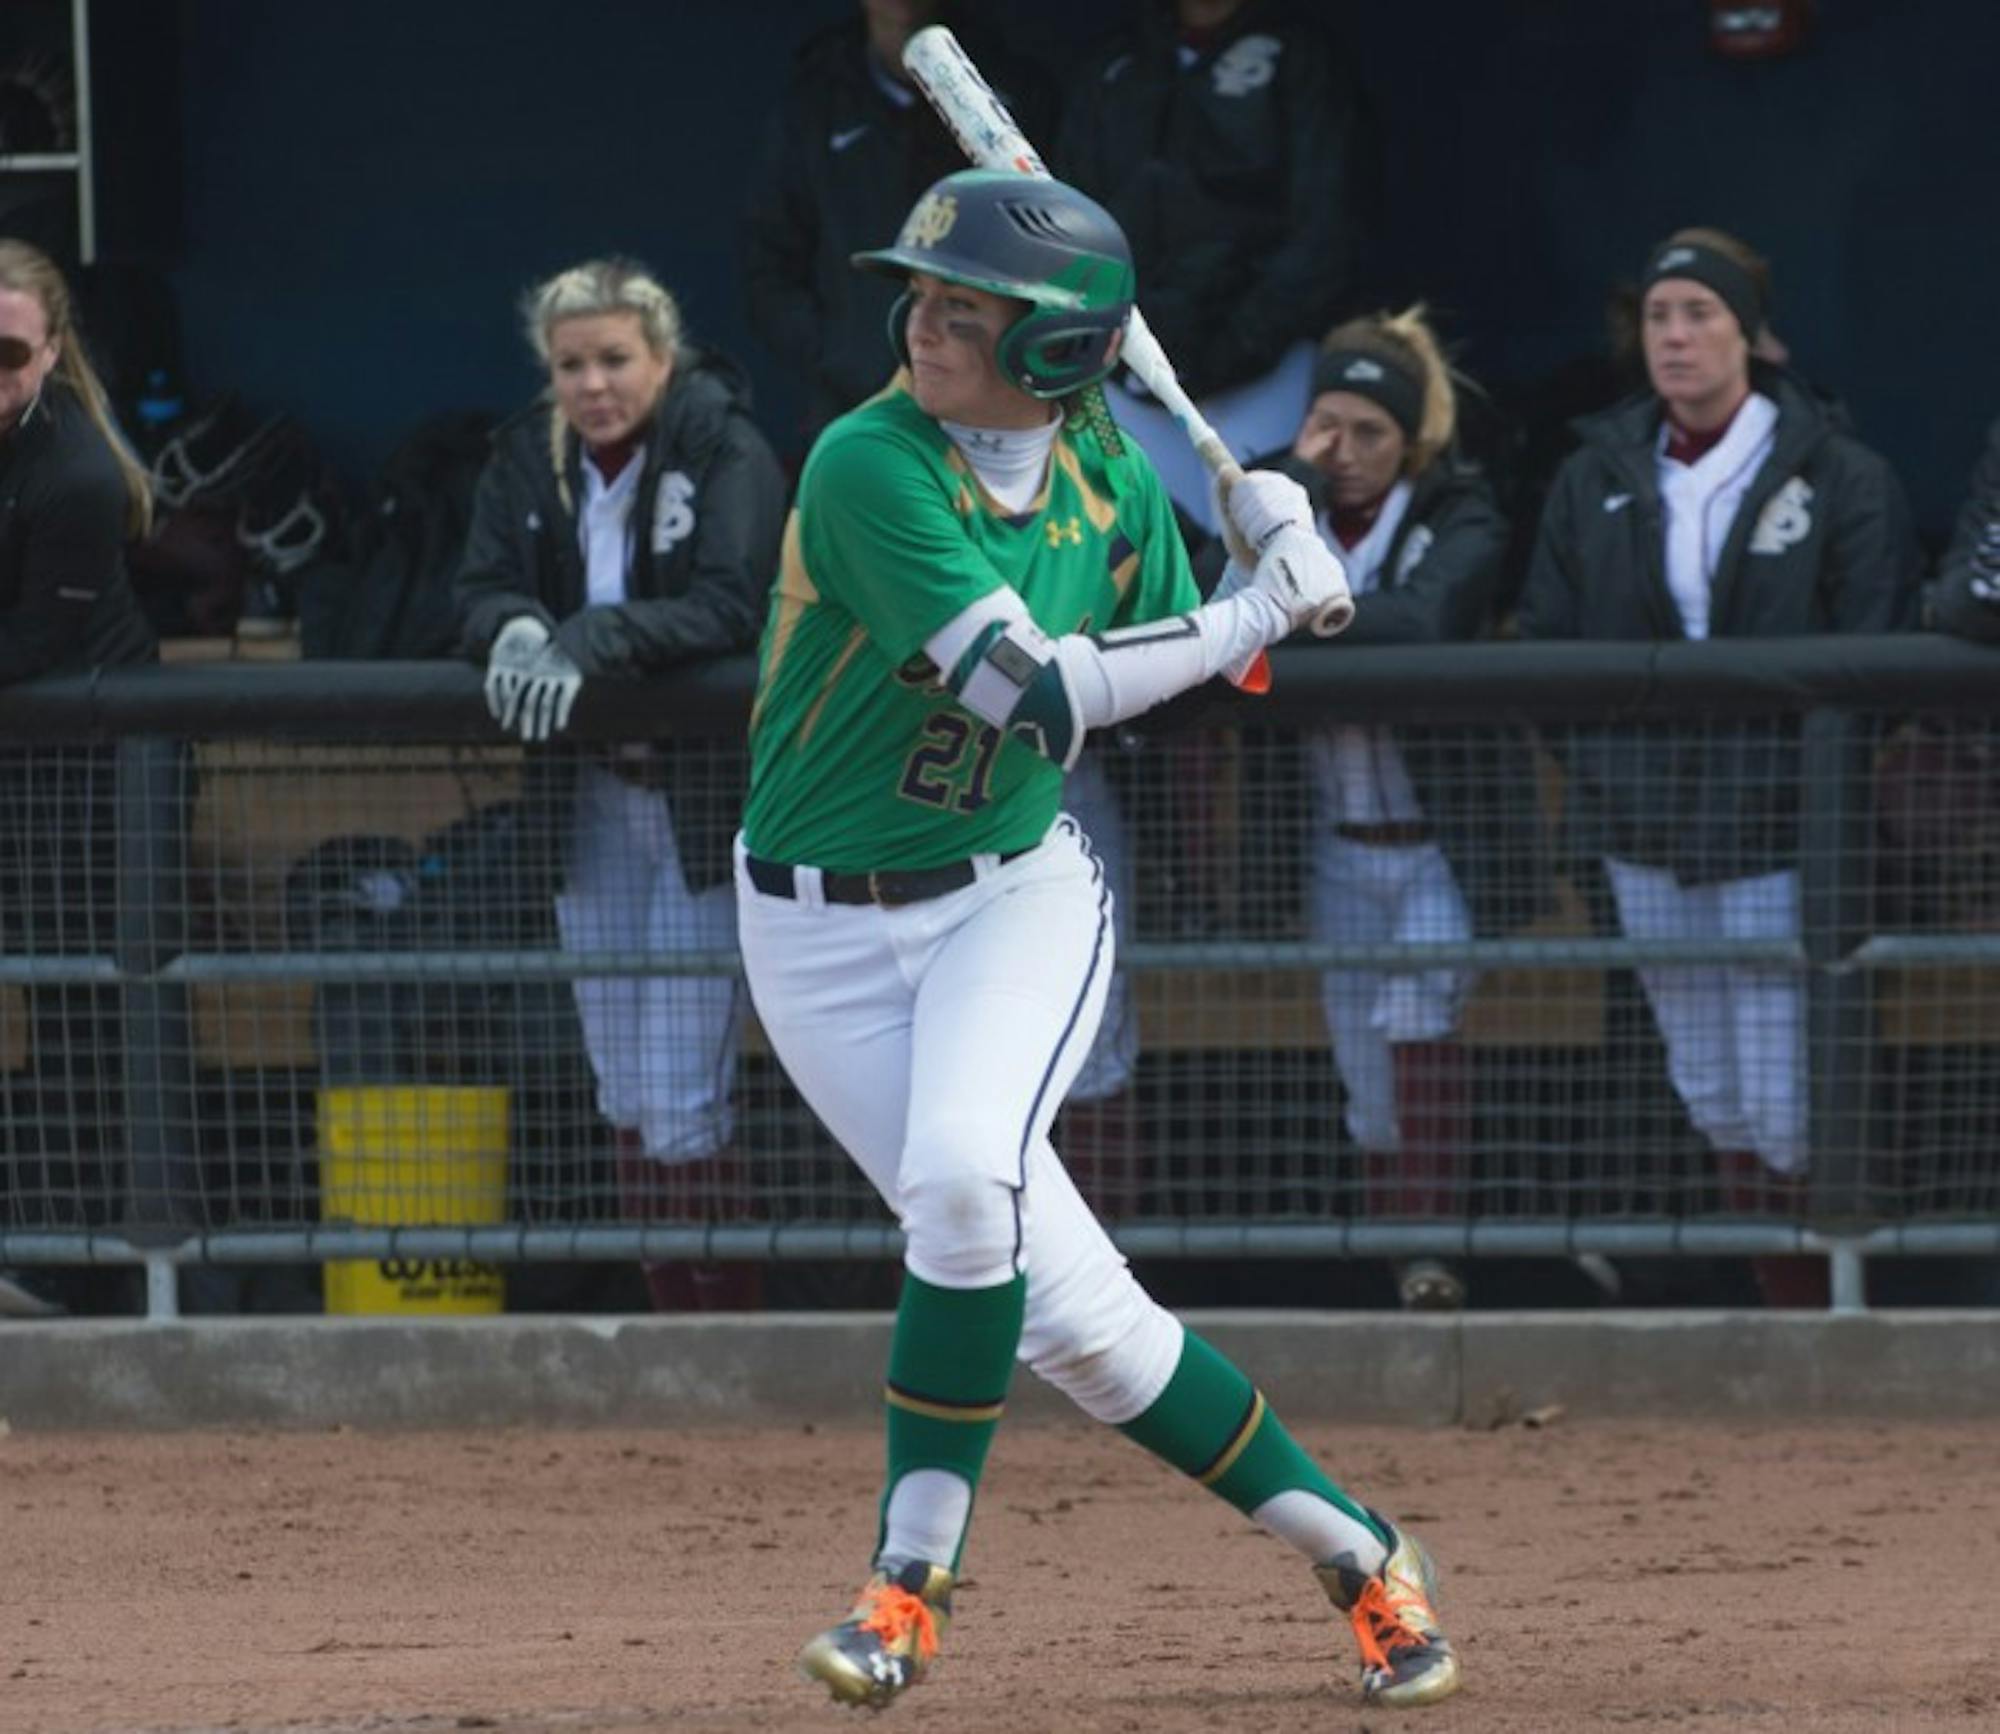 Junior center fielder Karley Wester takes a cut during Notre Dame’s doubleheader against Florida State on Sunday. Notre Dame lost the first game 14-5 but won the second game 5-4.